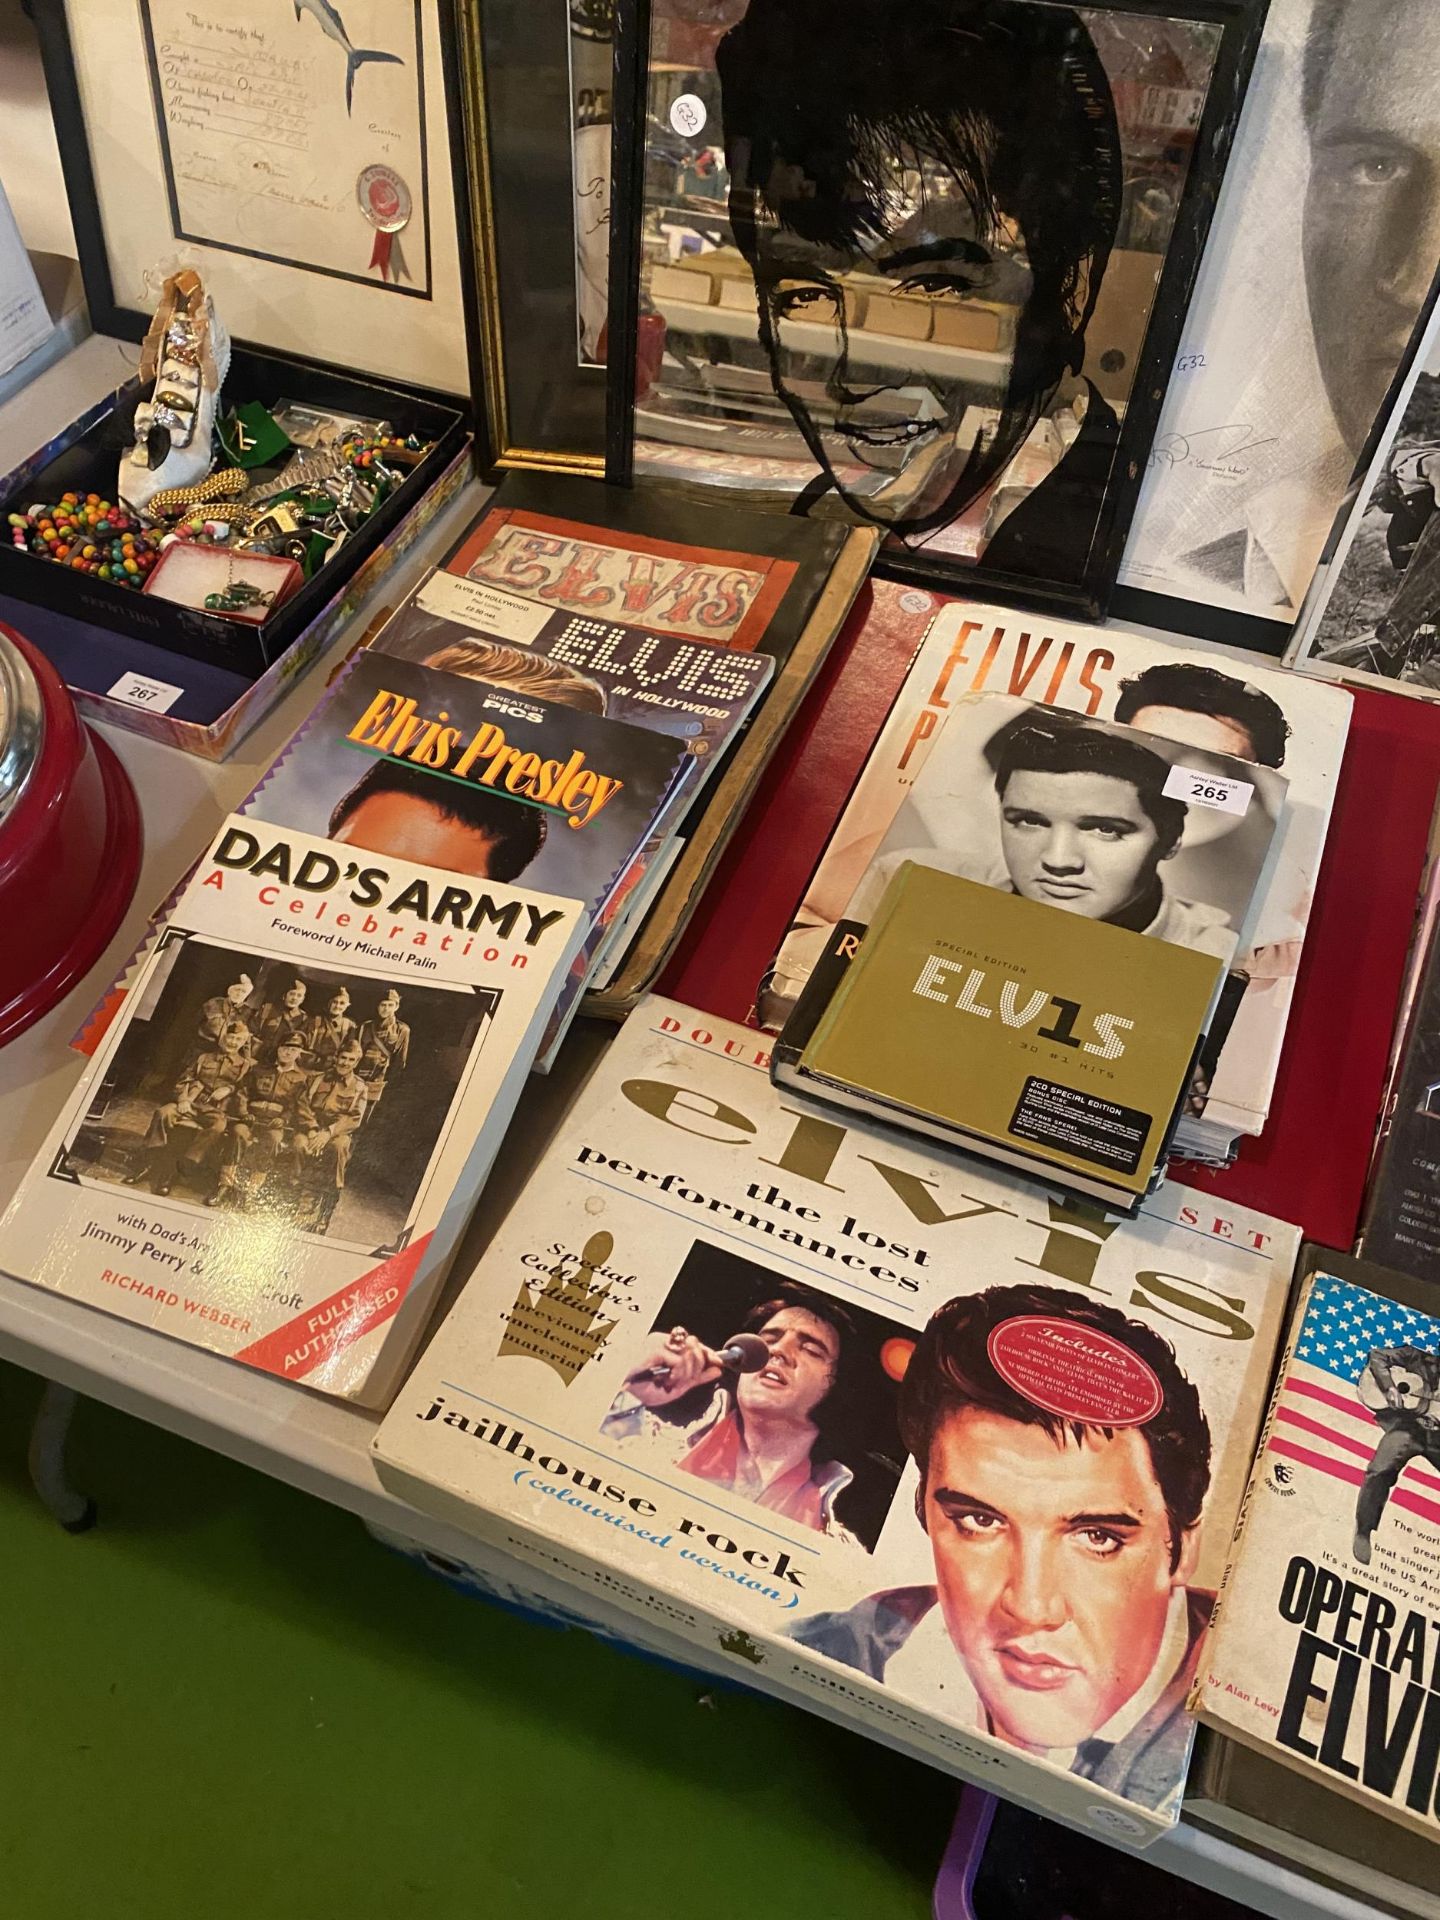 A LARGE COLLECTION OF MAINLY ELVIS PRESLEY MEMORABILIA TO INCLUDE BOOKS, CDS, DVDS, PICTURES ETC - Image 4 of 5